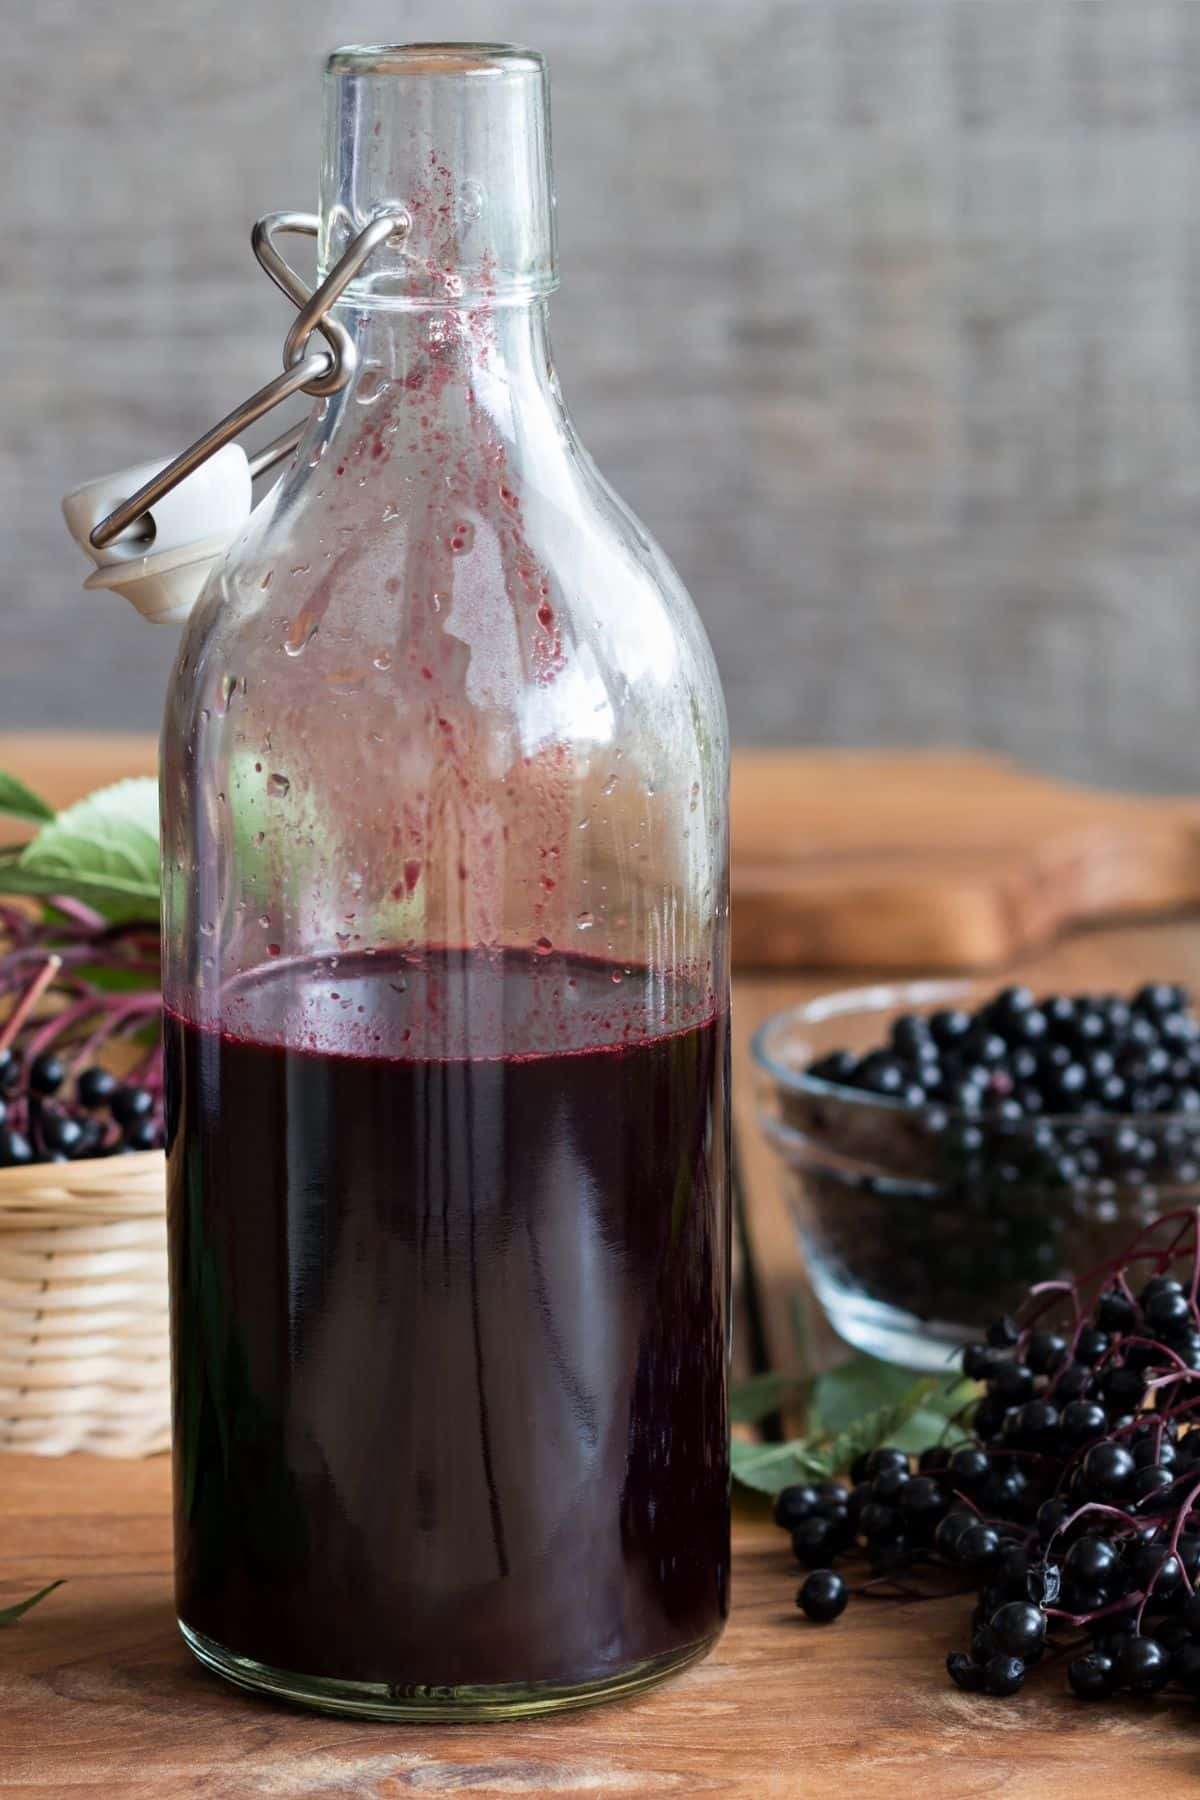 elderberry syrup in a jar on a table with elderberries.